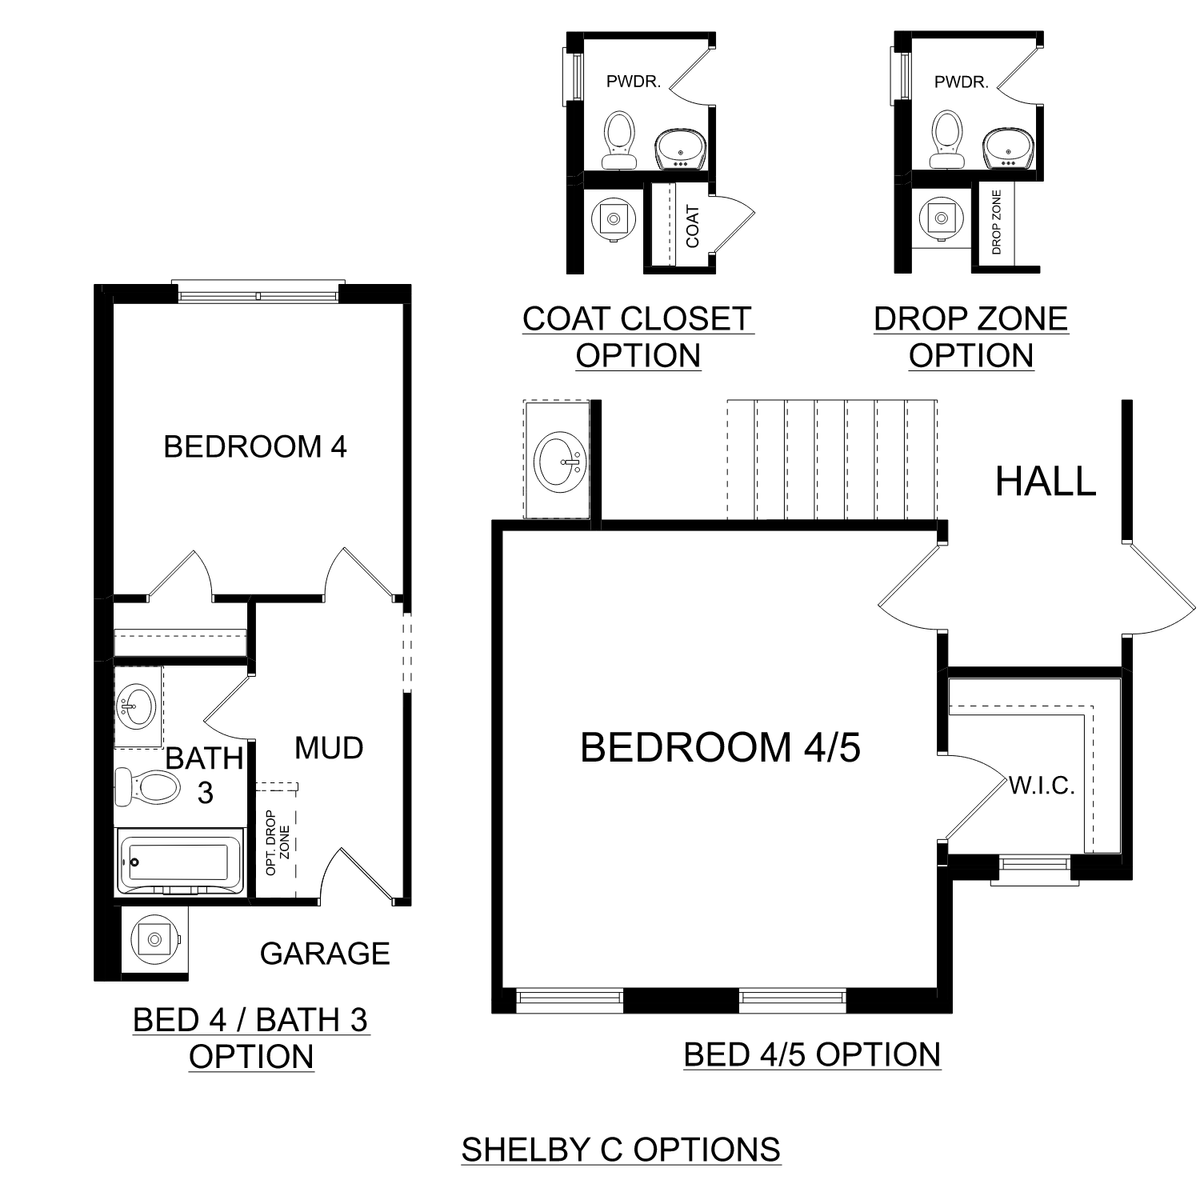 3 - The Shelby C buildable floor plan layout in Davidson Homes' Monteagle Cove community.